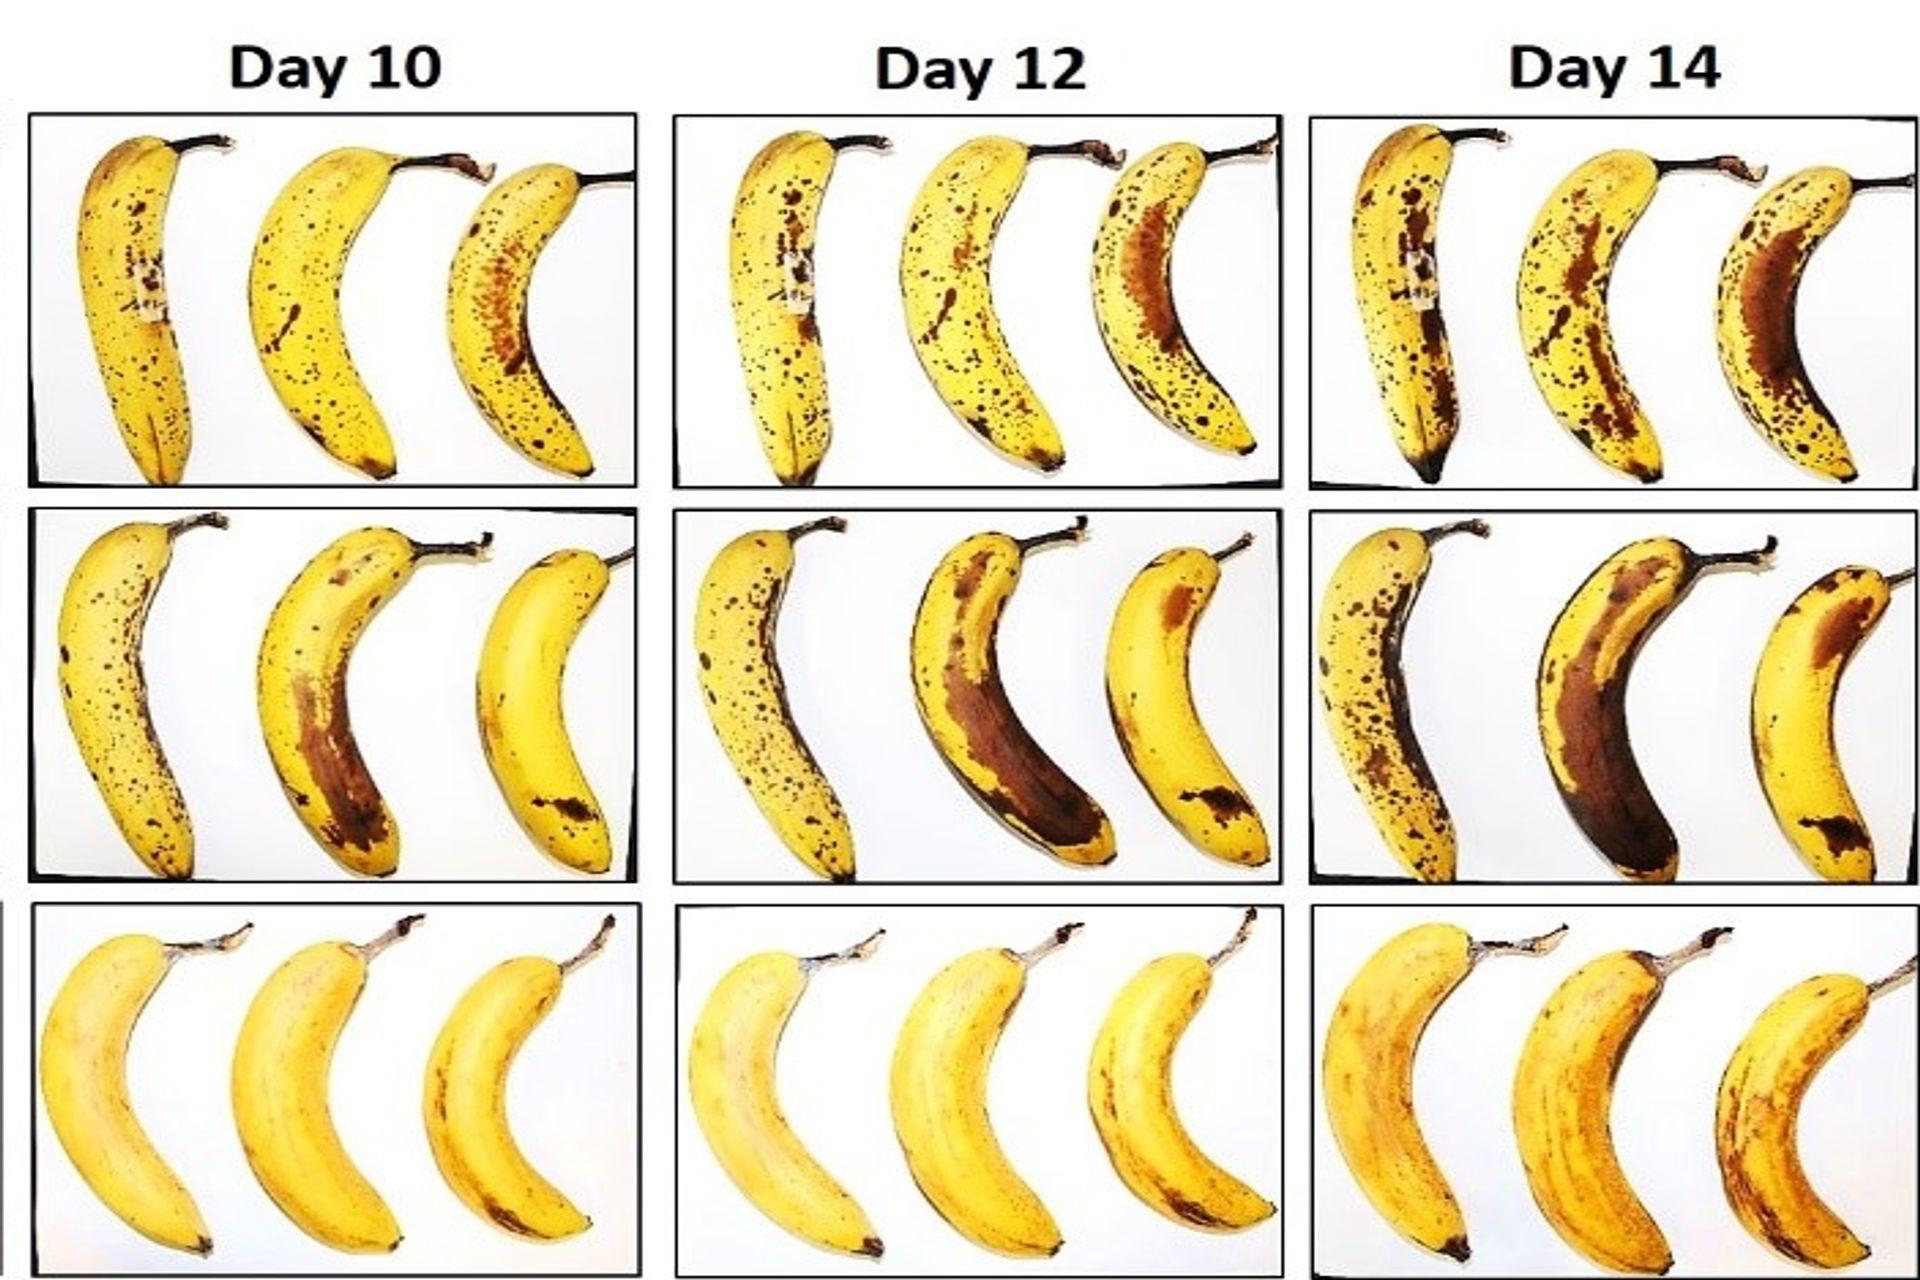 Three bananas subjected by EMPA and Lidl Switzerland to the conservation test with and without fibrous cellulose wrapping after 10, 12 and 14 days